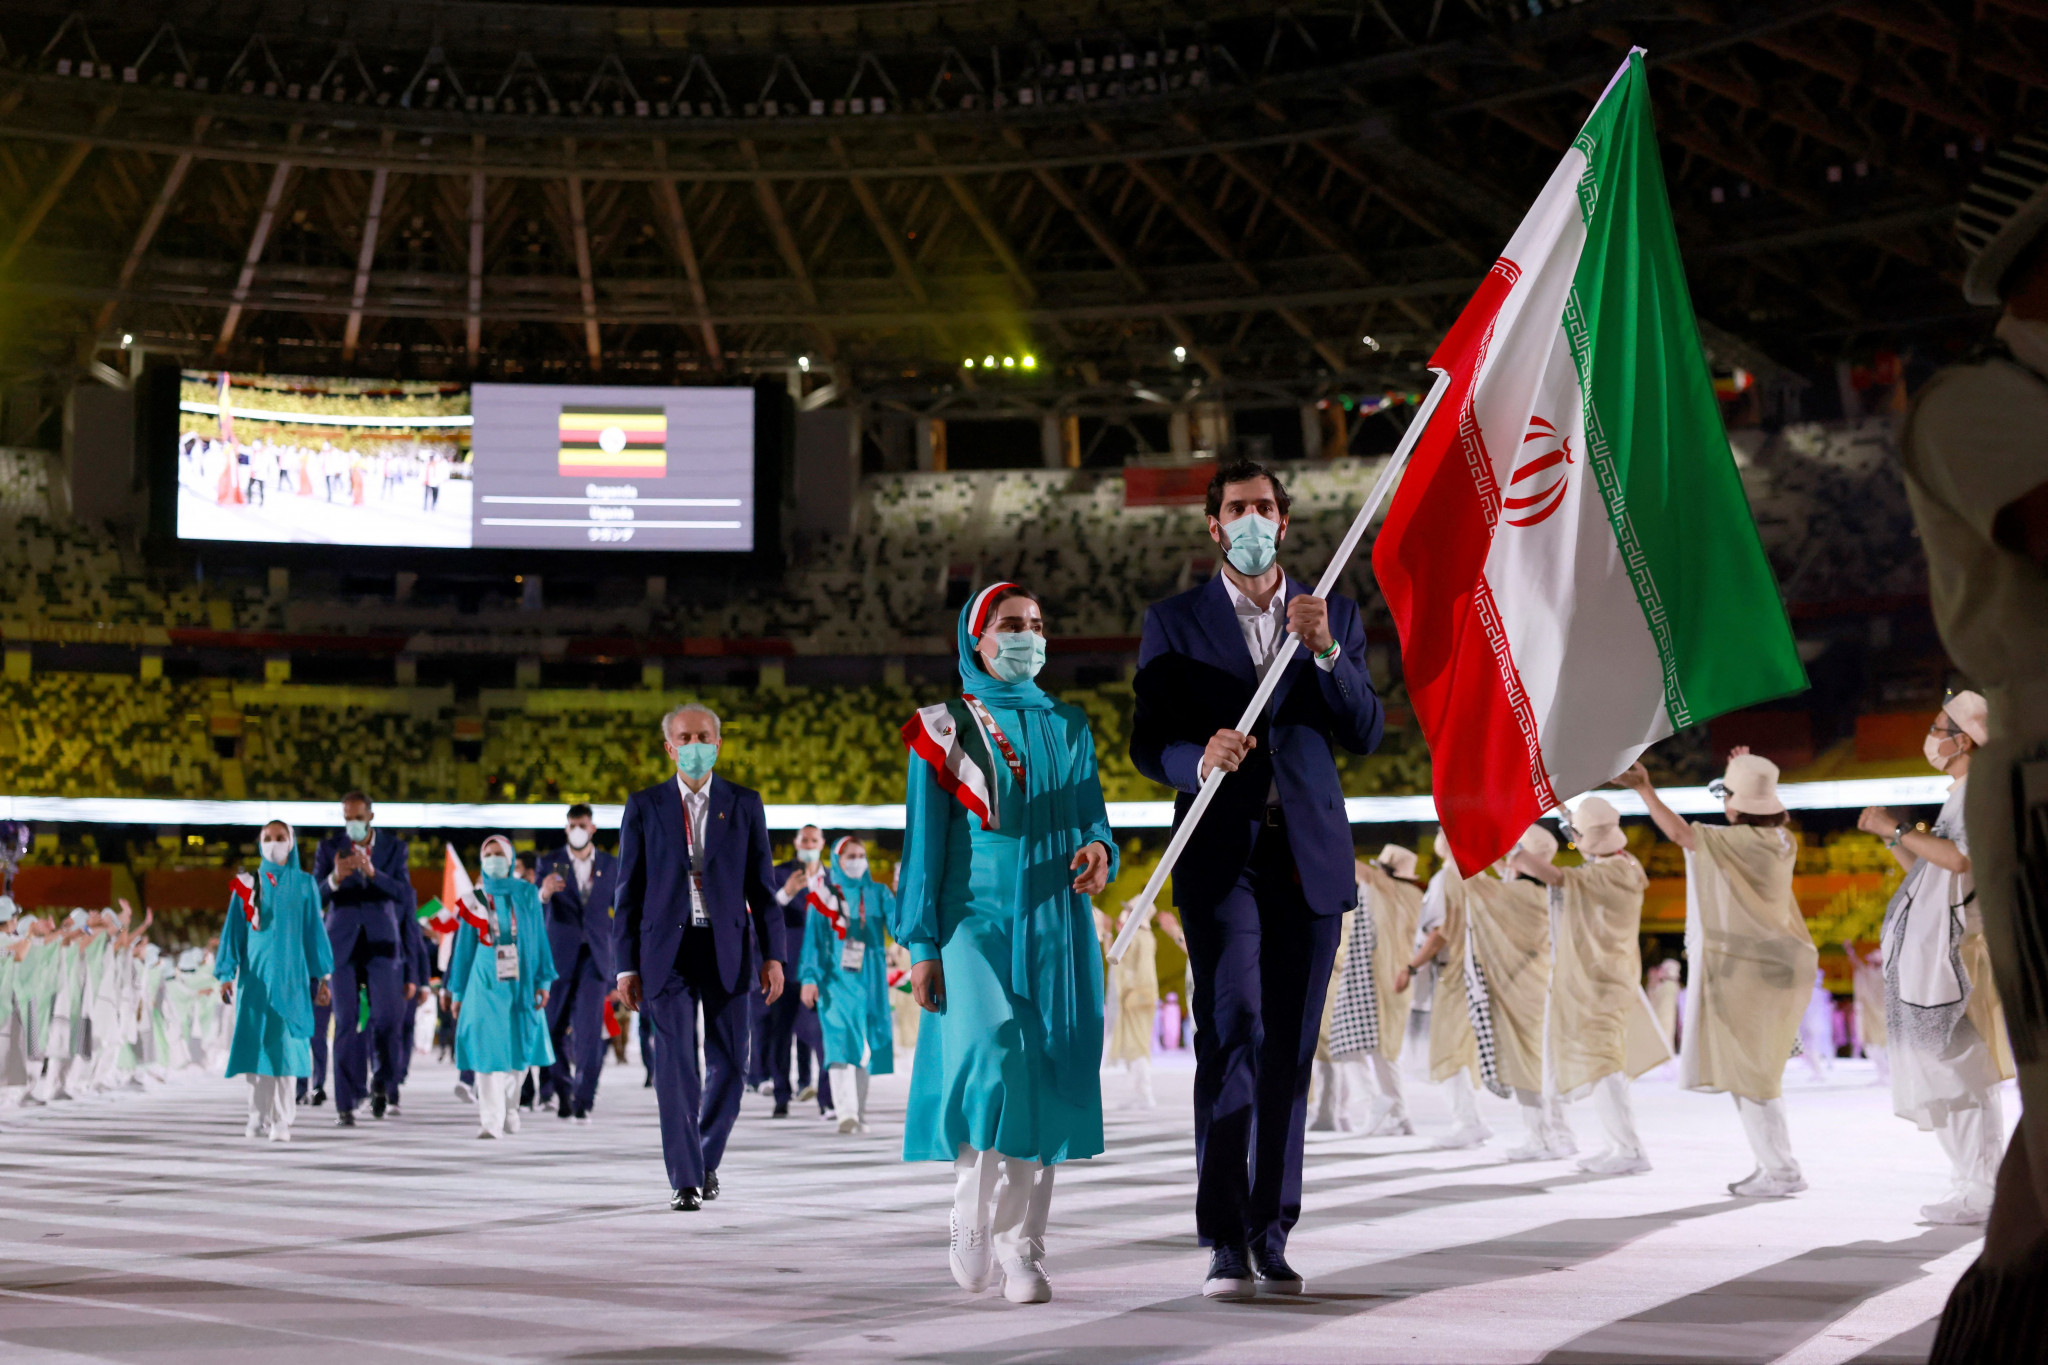 Iran is facing accusations of violating the Olympic Charter due to discrimination against women in sport ©Getty Images